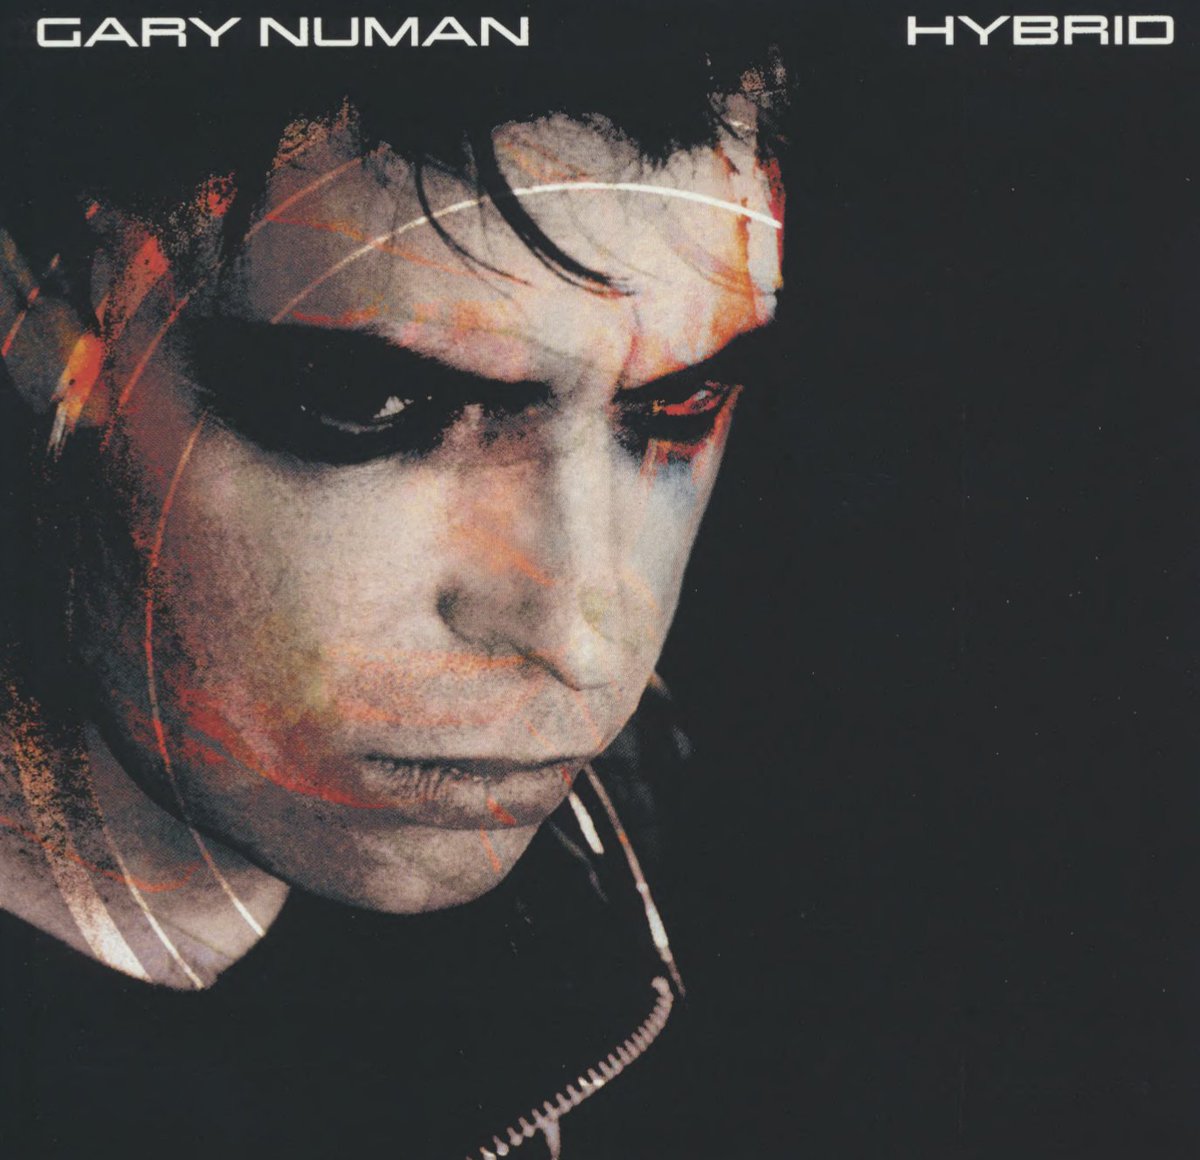 #GaryNuman's Hybrid release notes, lyrics, photos, disc and cover images are here: drive.google.com/drive/folders/…